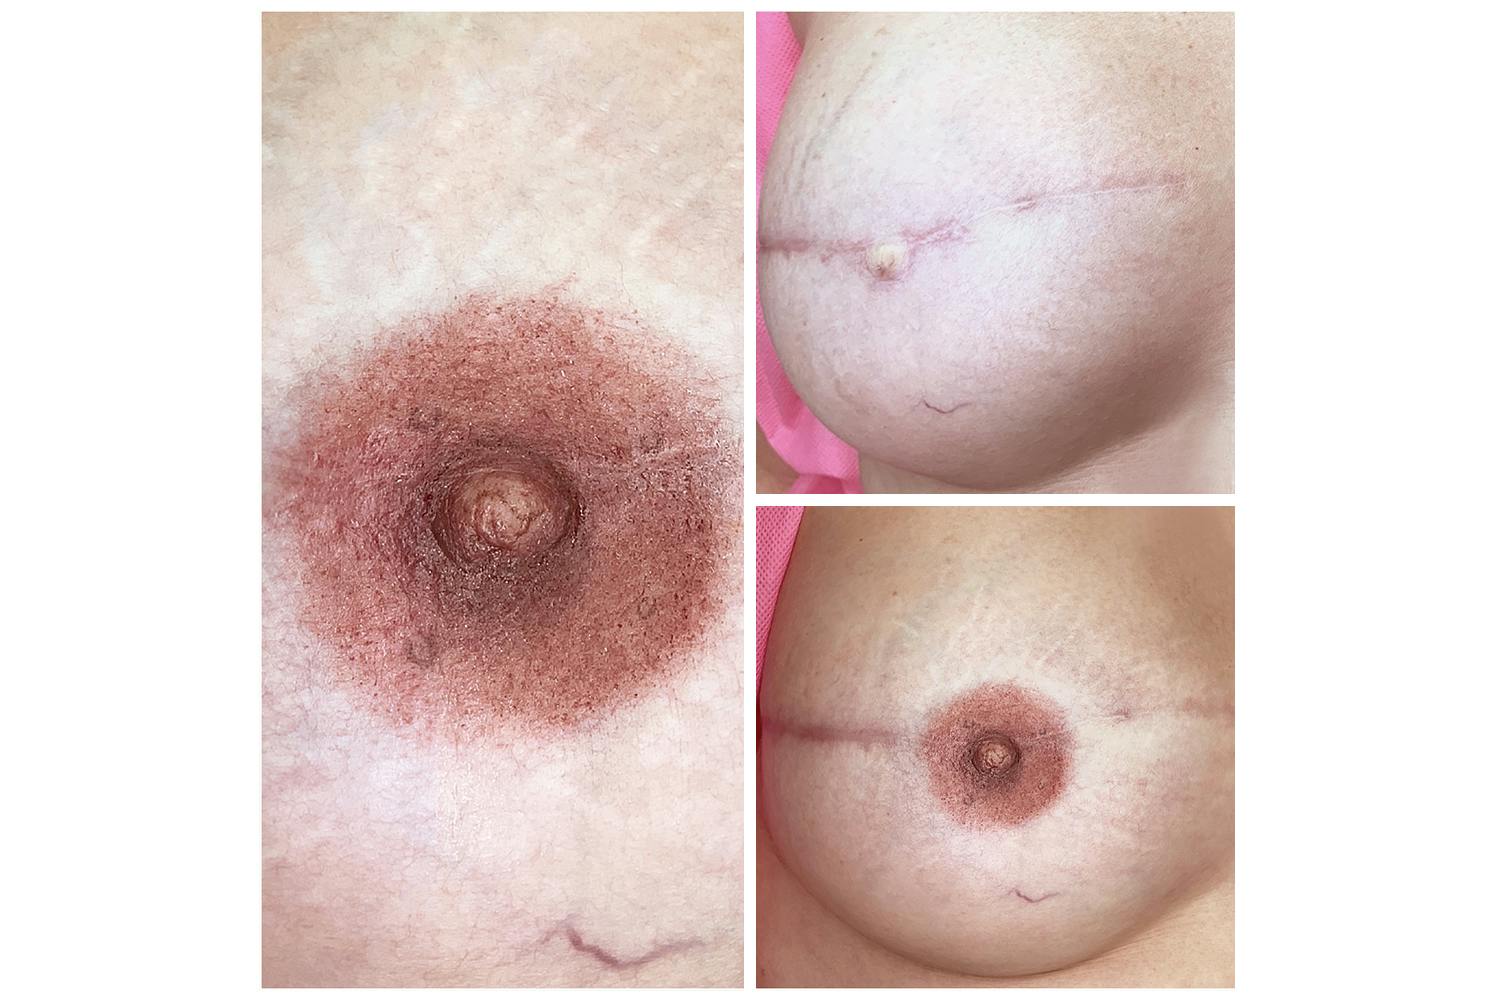 Areola reconstruction (or repigmentation), for women who have fought and conquered breast cancer, is like seeing the first shoots of green after a devastating forest fire.